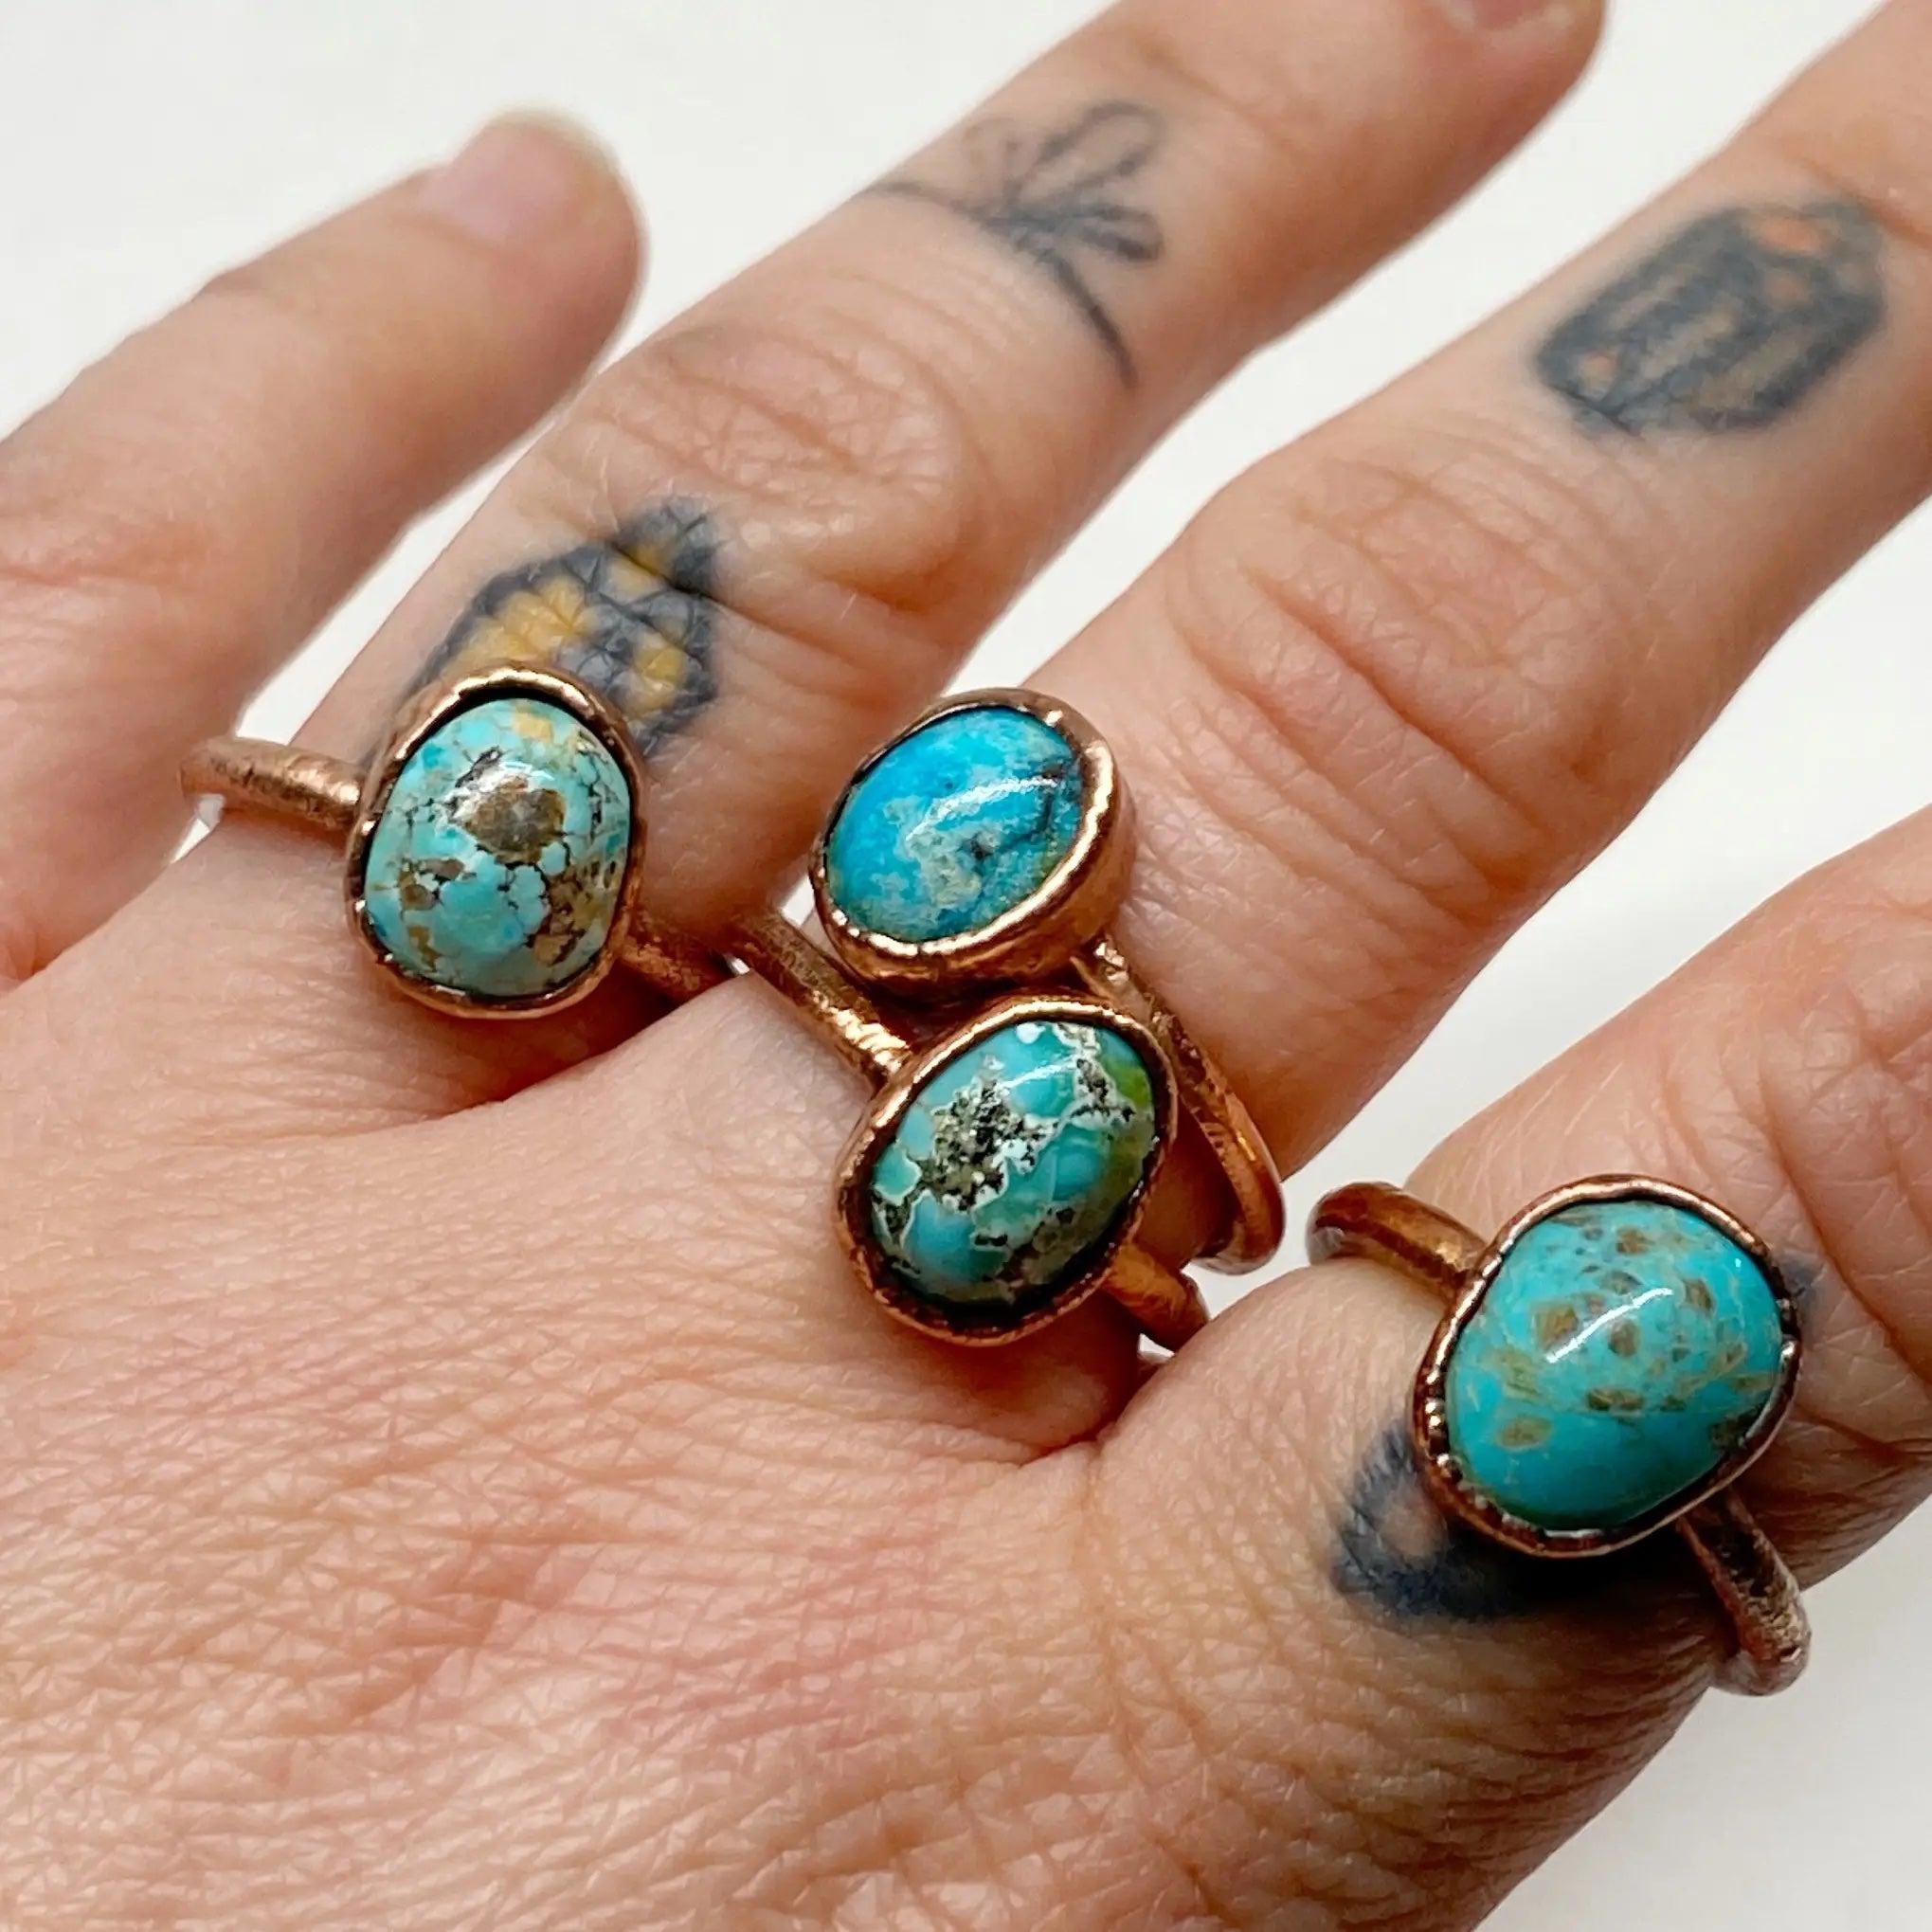 Southwest Turquoise & Copper Ring (Size US 8-8.5) - Electroformed Copper